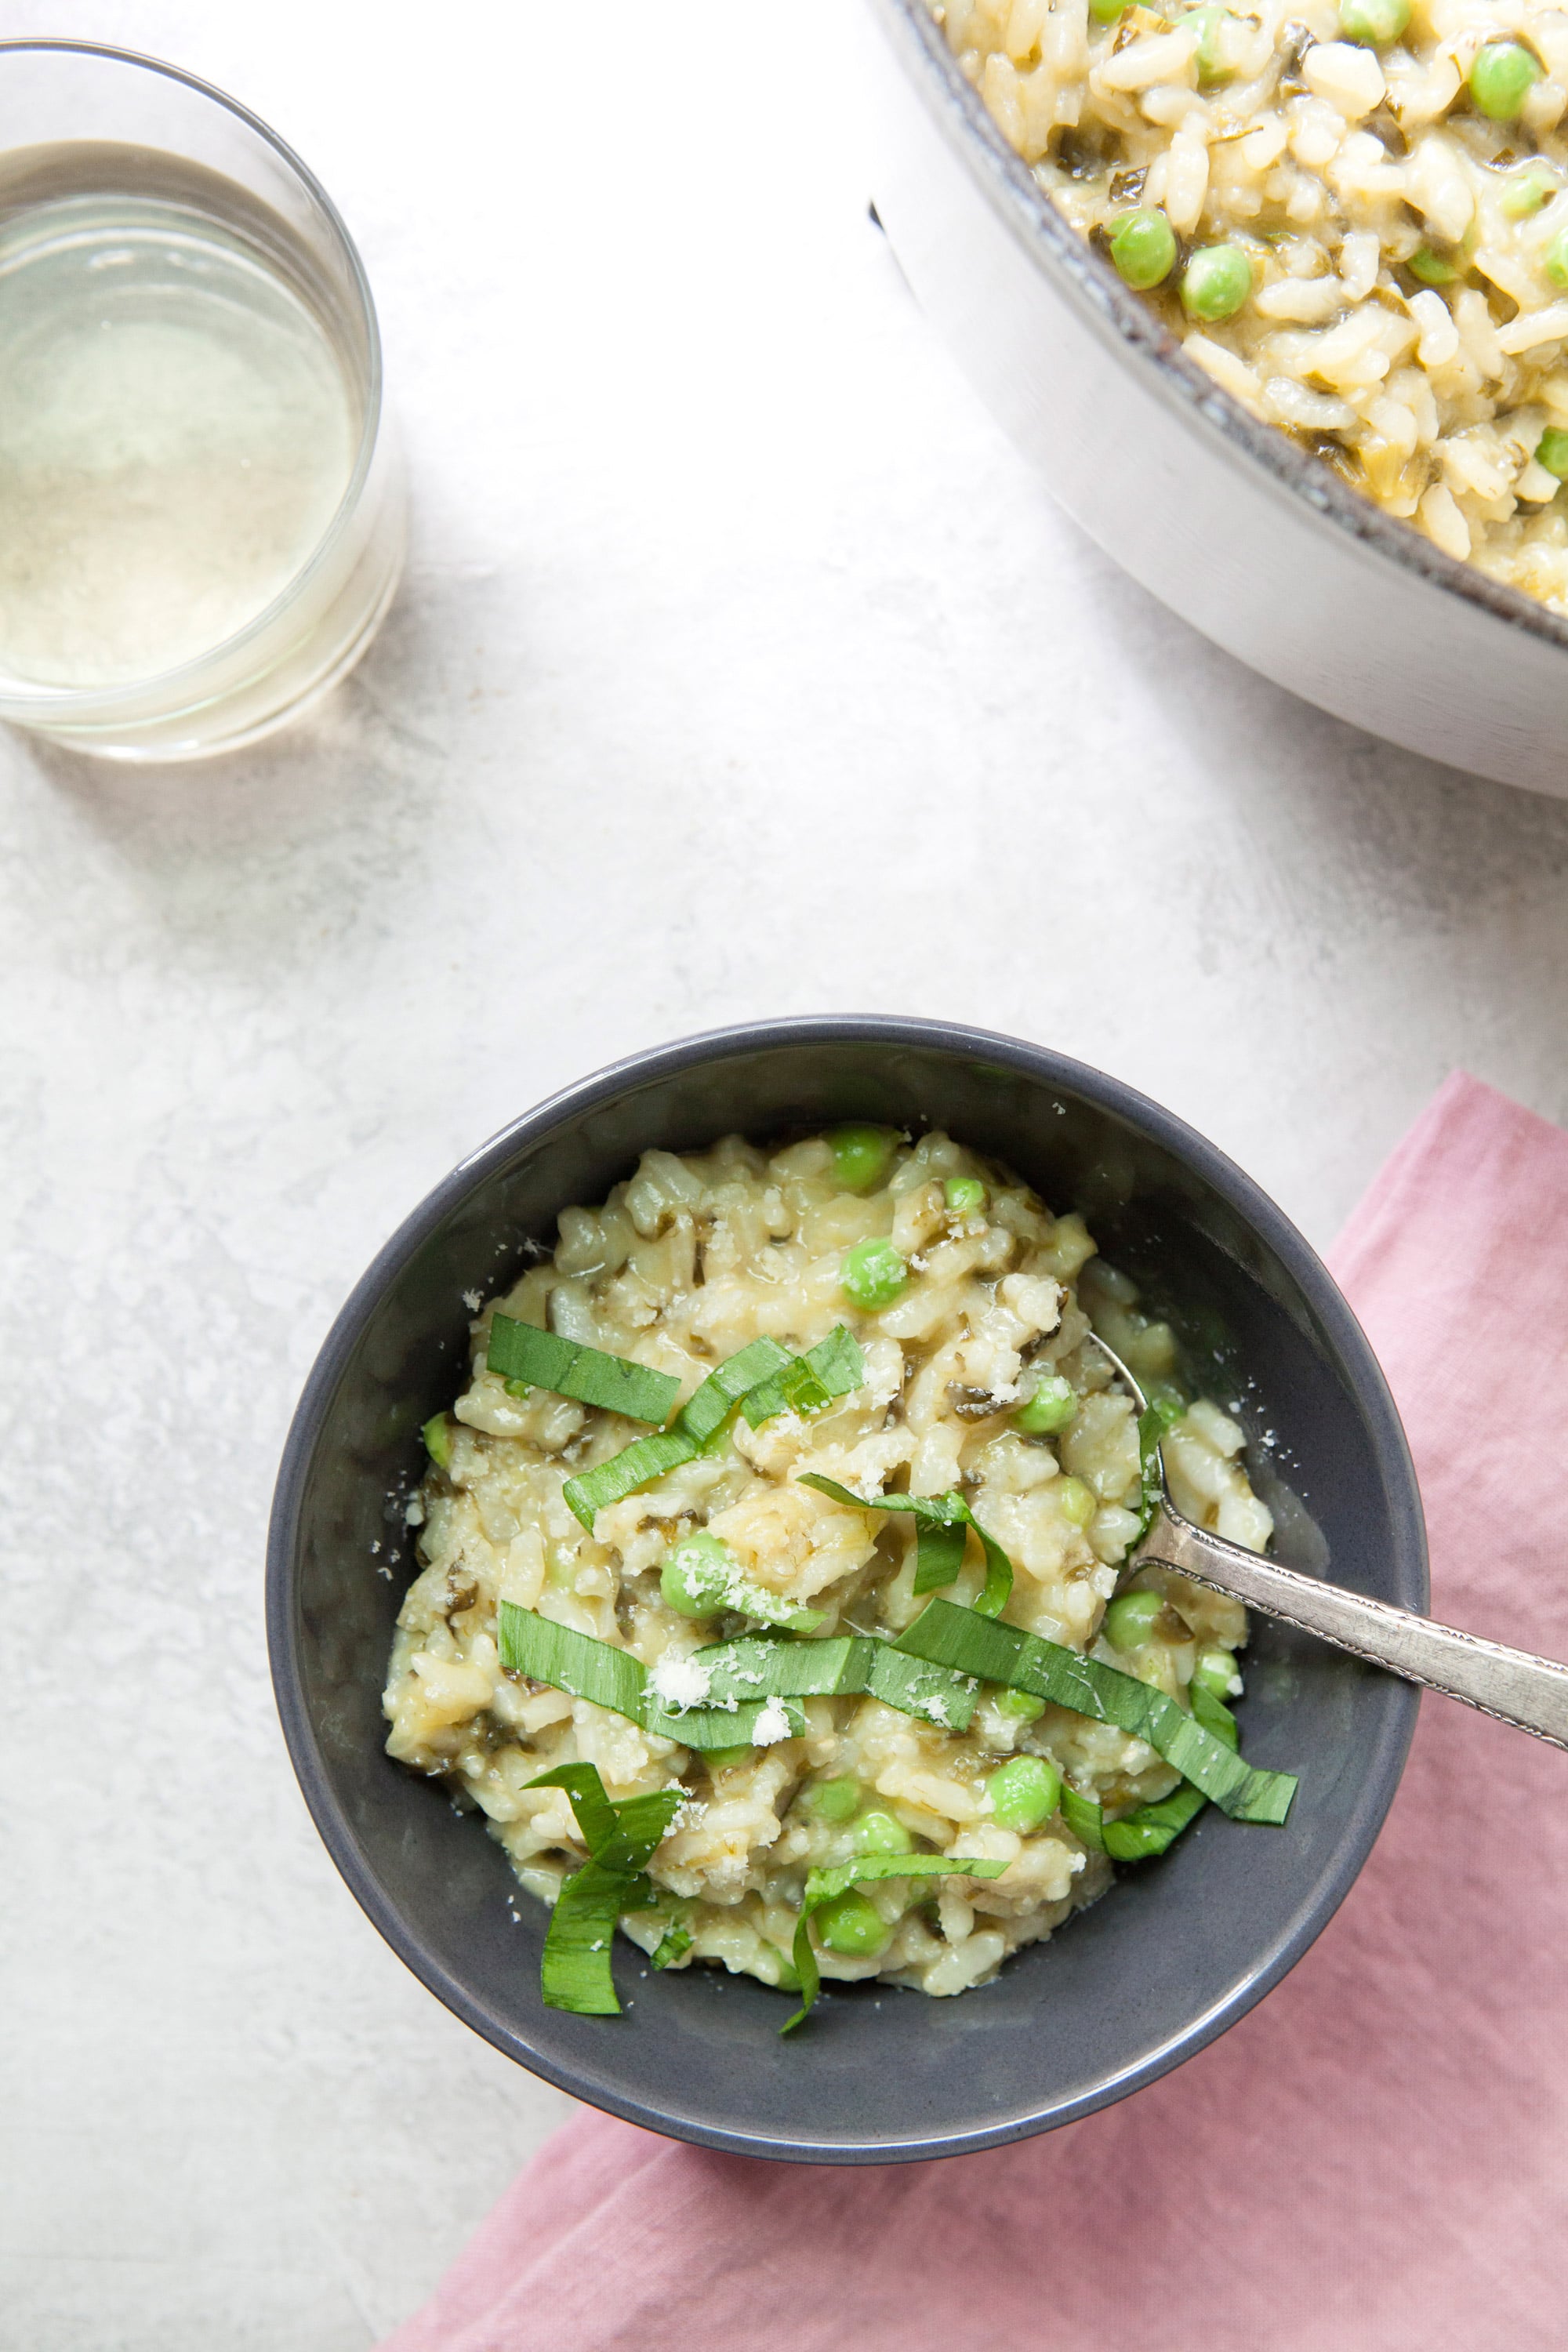 Spring Ramp and Pea Risotto / Photo by Kerri Brewer / Katie Workman / themom100.com